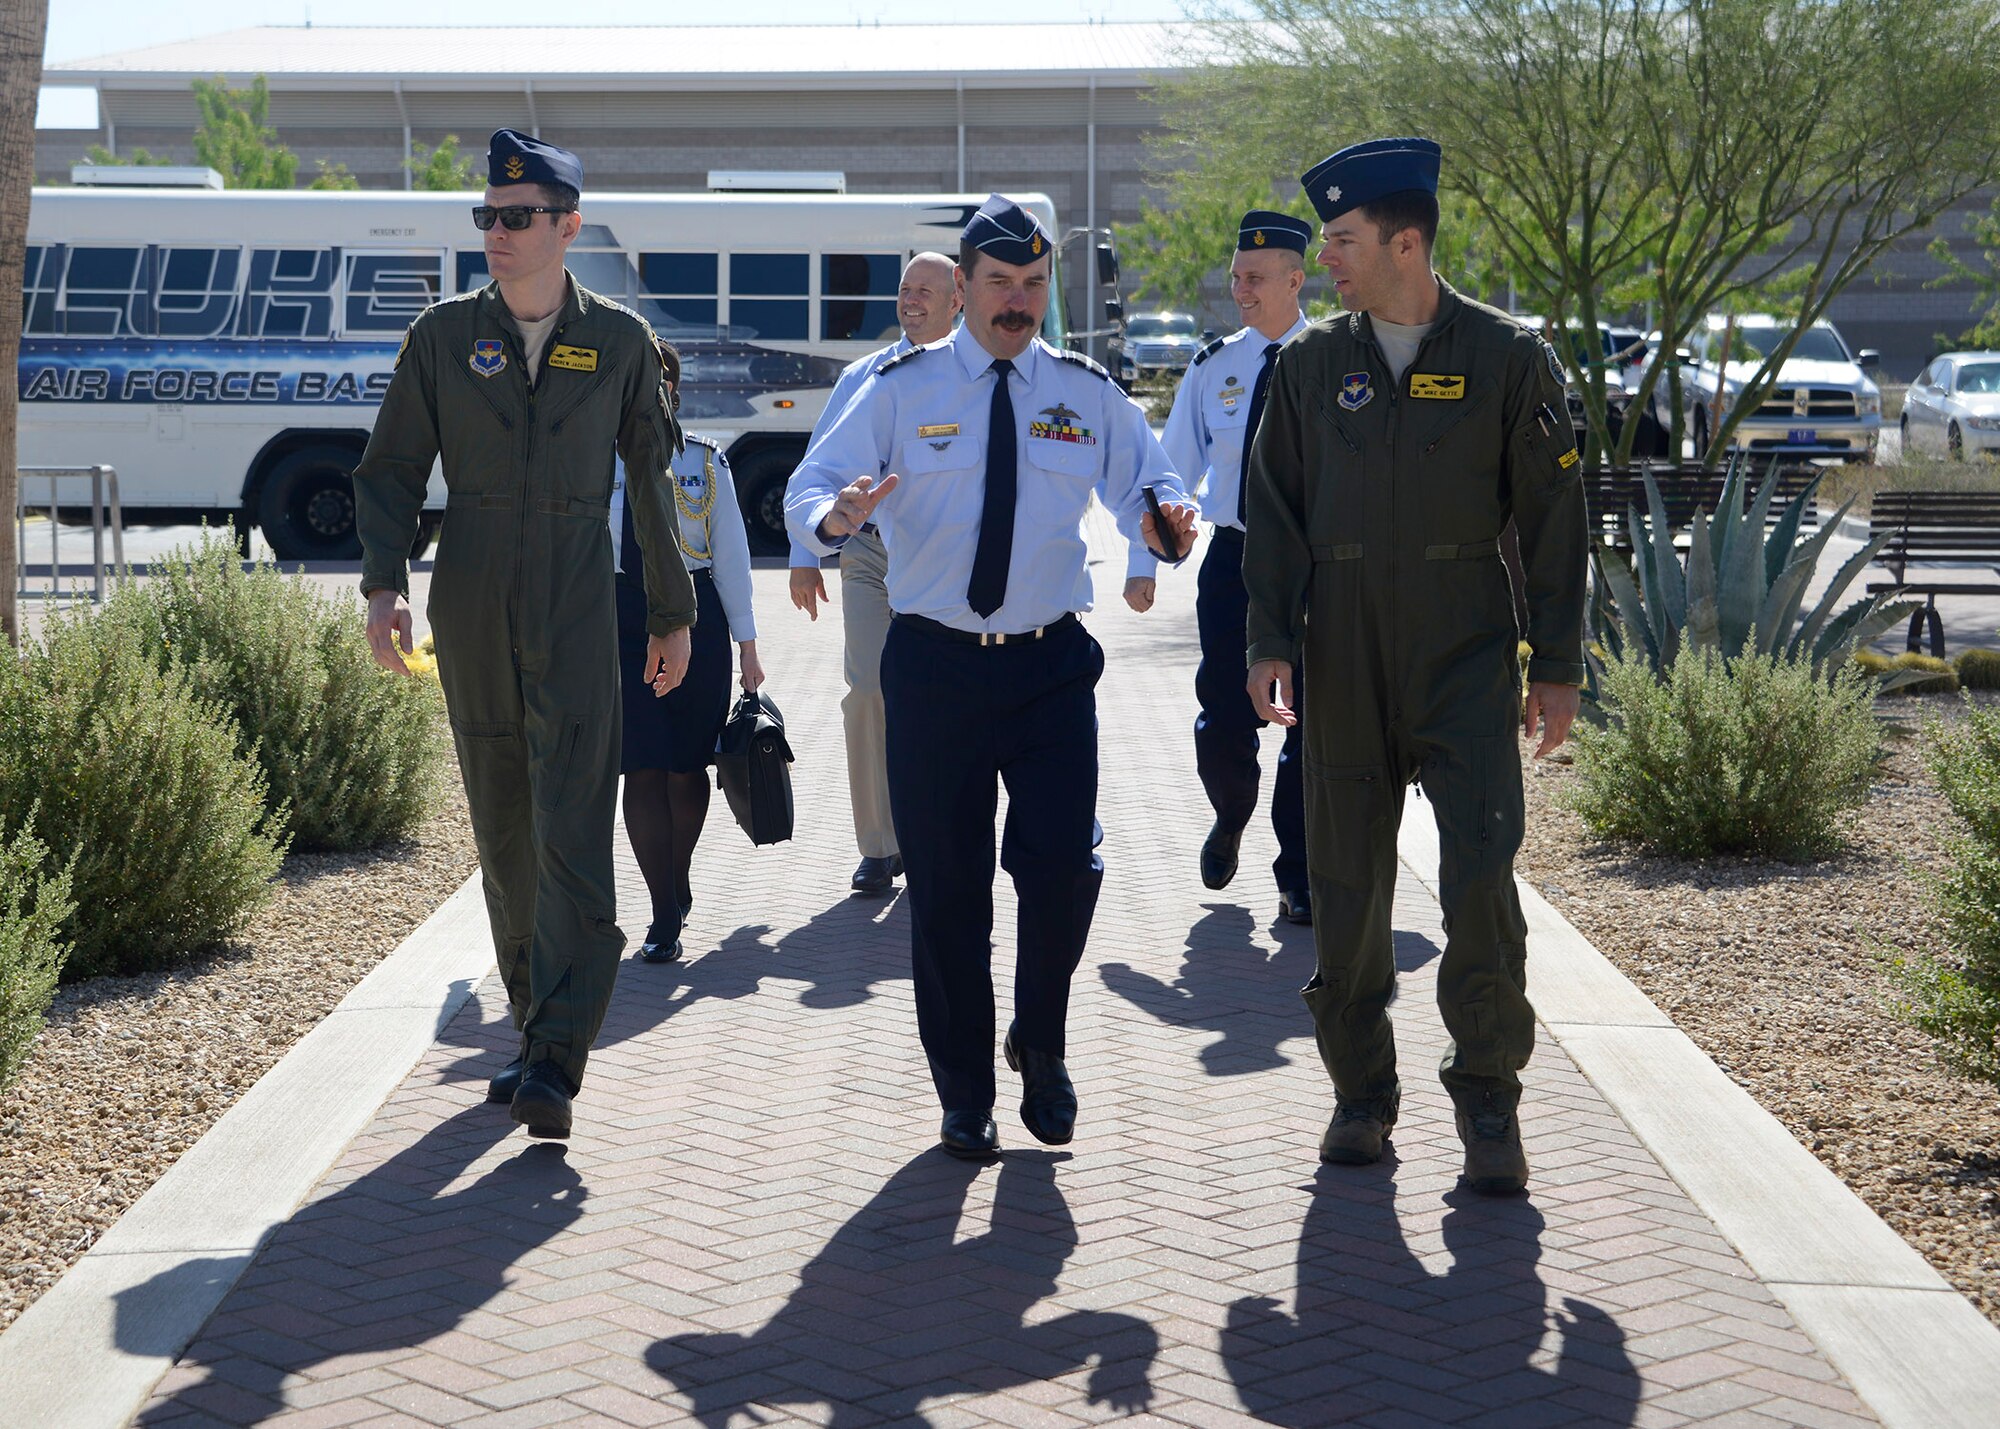 Air Marshal Gavin Davies, Royal Australian Air Force chief, and Lt. Col. Michael Gette, 61st Fighter Squadron commander, enter the 61st Fighter Squadron May 17, 2017, at Luke Air Force Base, Ariz. Davies visited Luke to learn about ongoing and future activities regarding F-35 pilot training and maintenance. (U.S. Air Force photo by Senior Airman Devante Williams) 